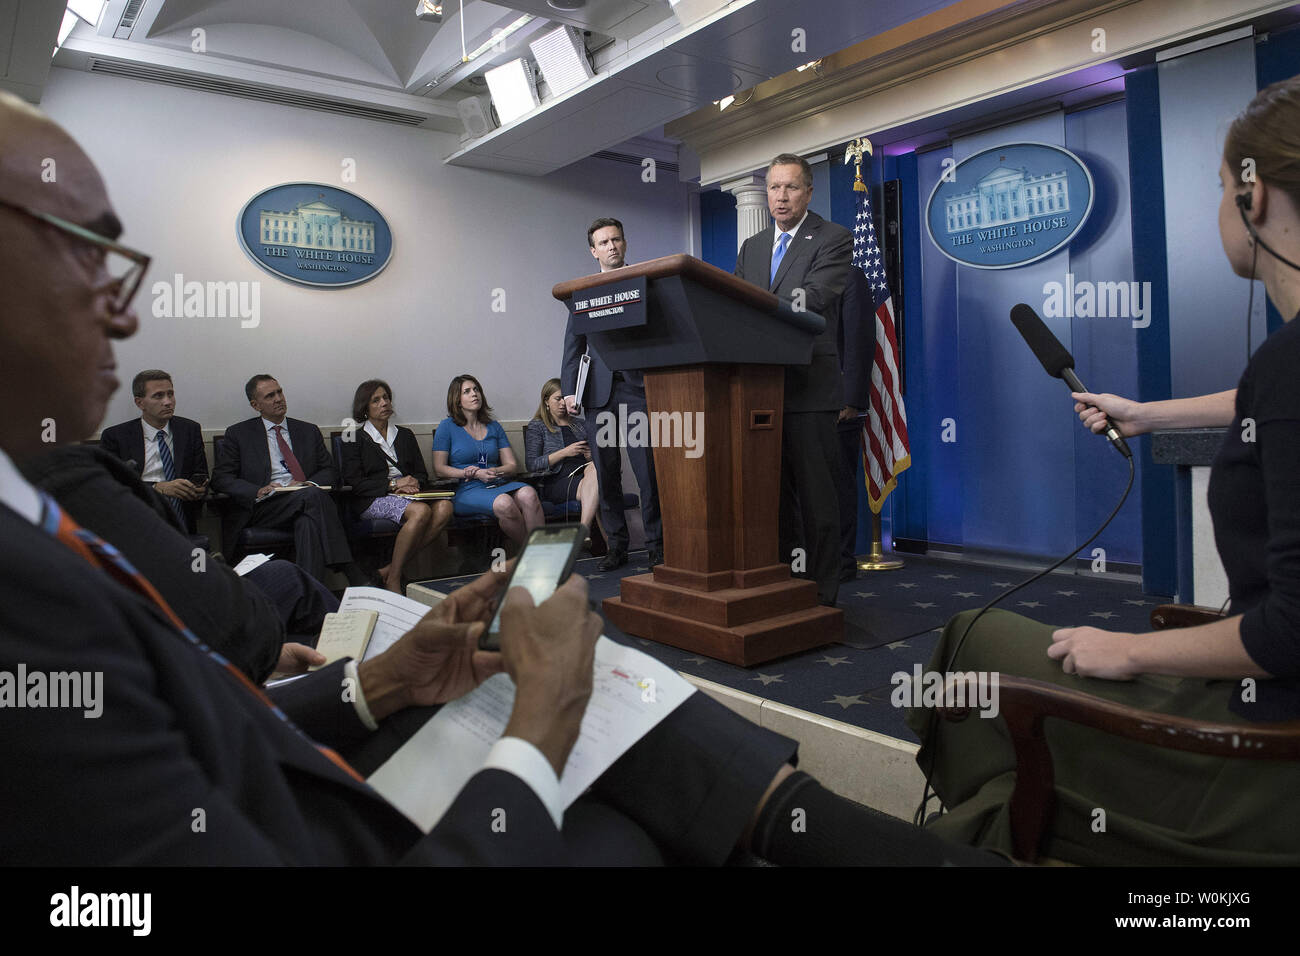 Ohio Governor John Kasich, joined by White House Press Secretary Josh Earnest, speaks to the press on the Trans-Pacific Partnership following a meeting with President Barack Obama at the White House in Washington, D.C. on September 16, 2016. Photo by Kevin Dietsch/UPI Stock Photo